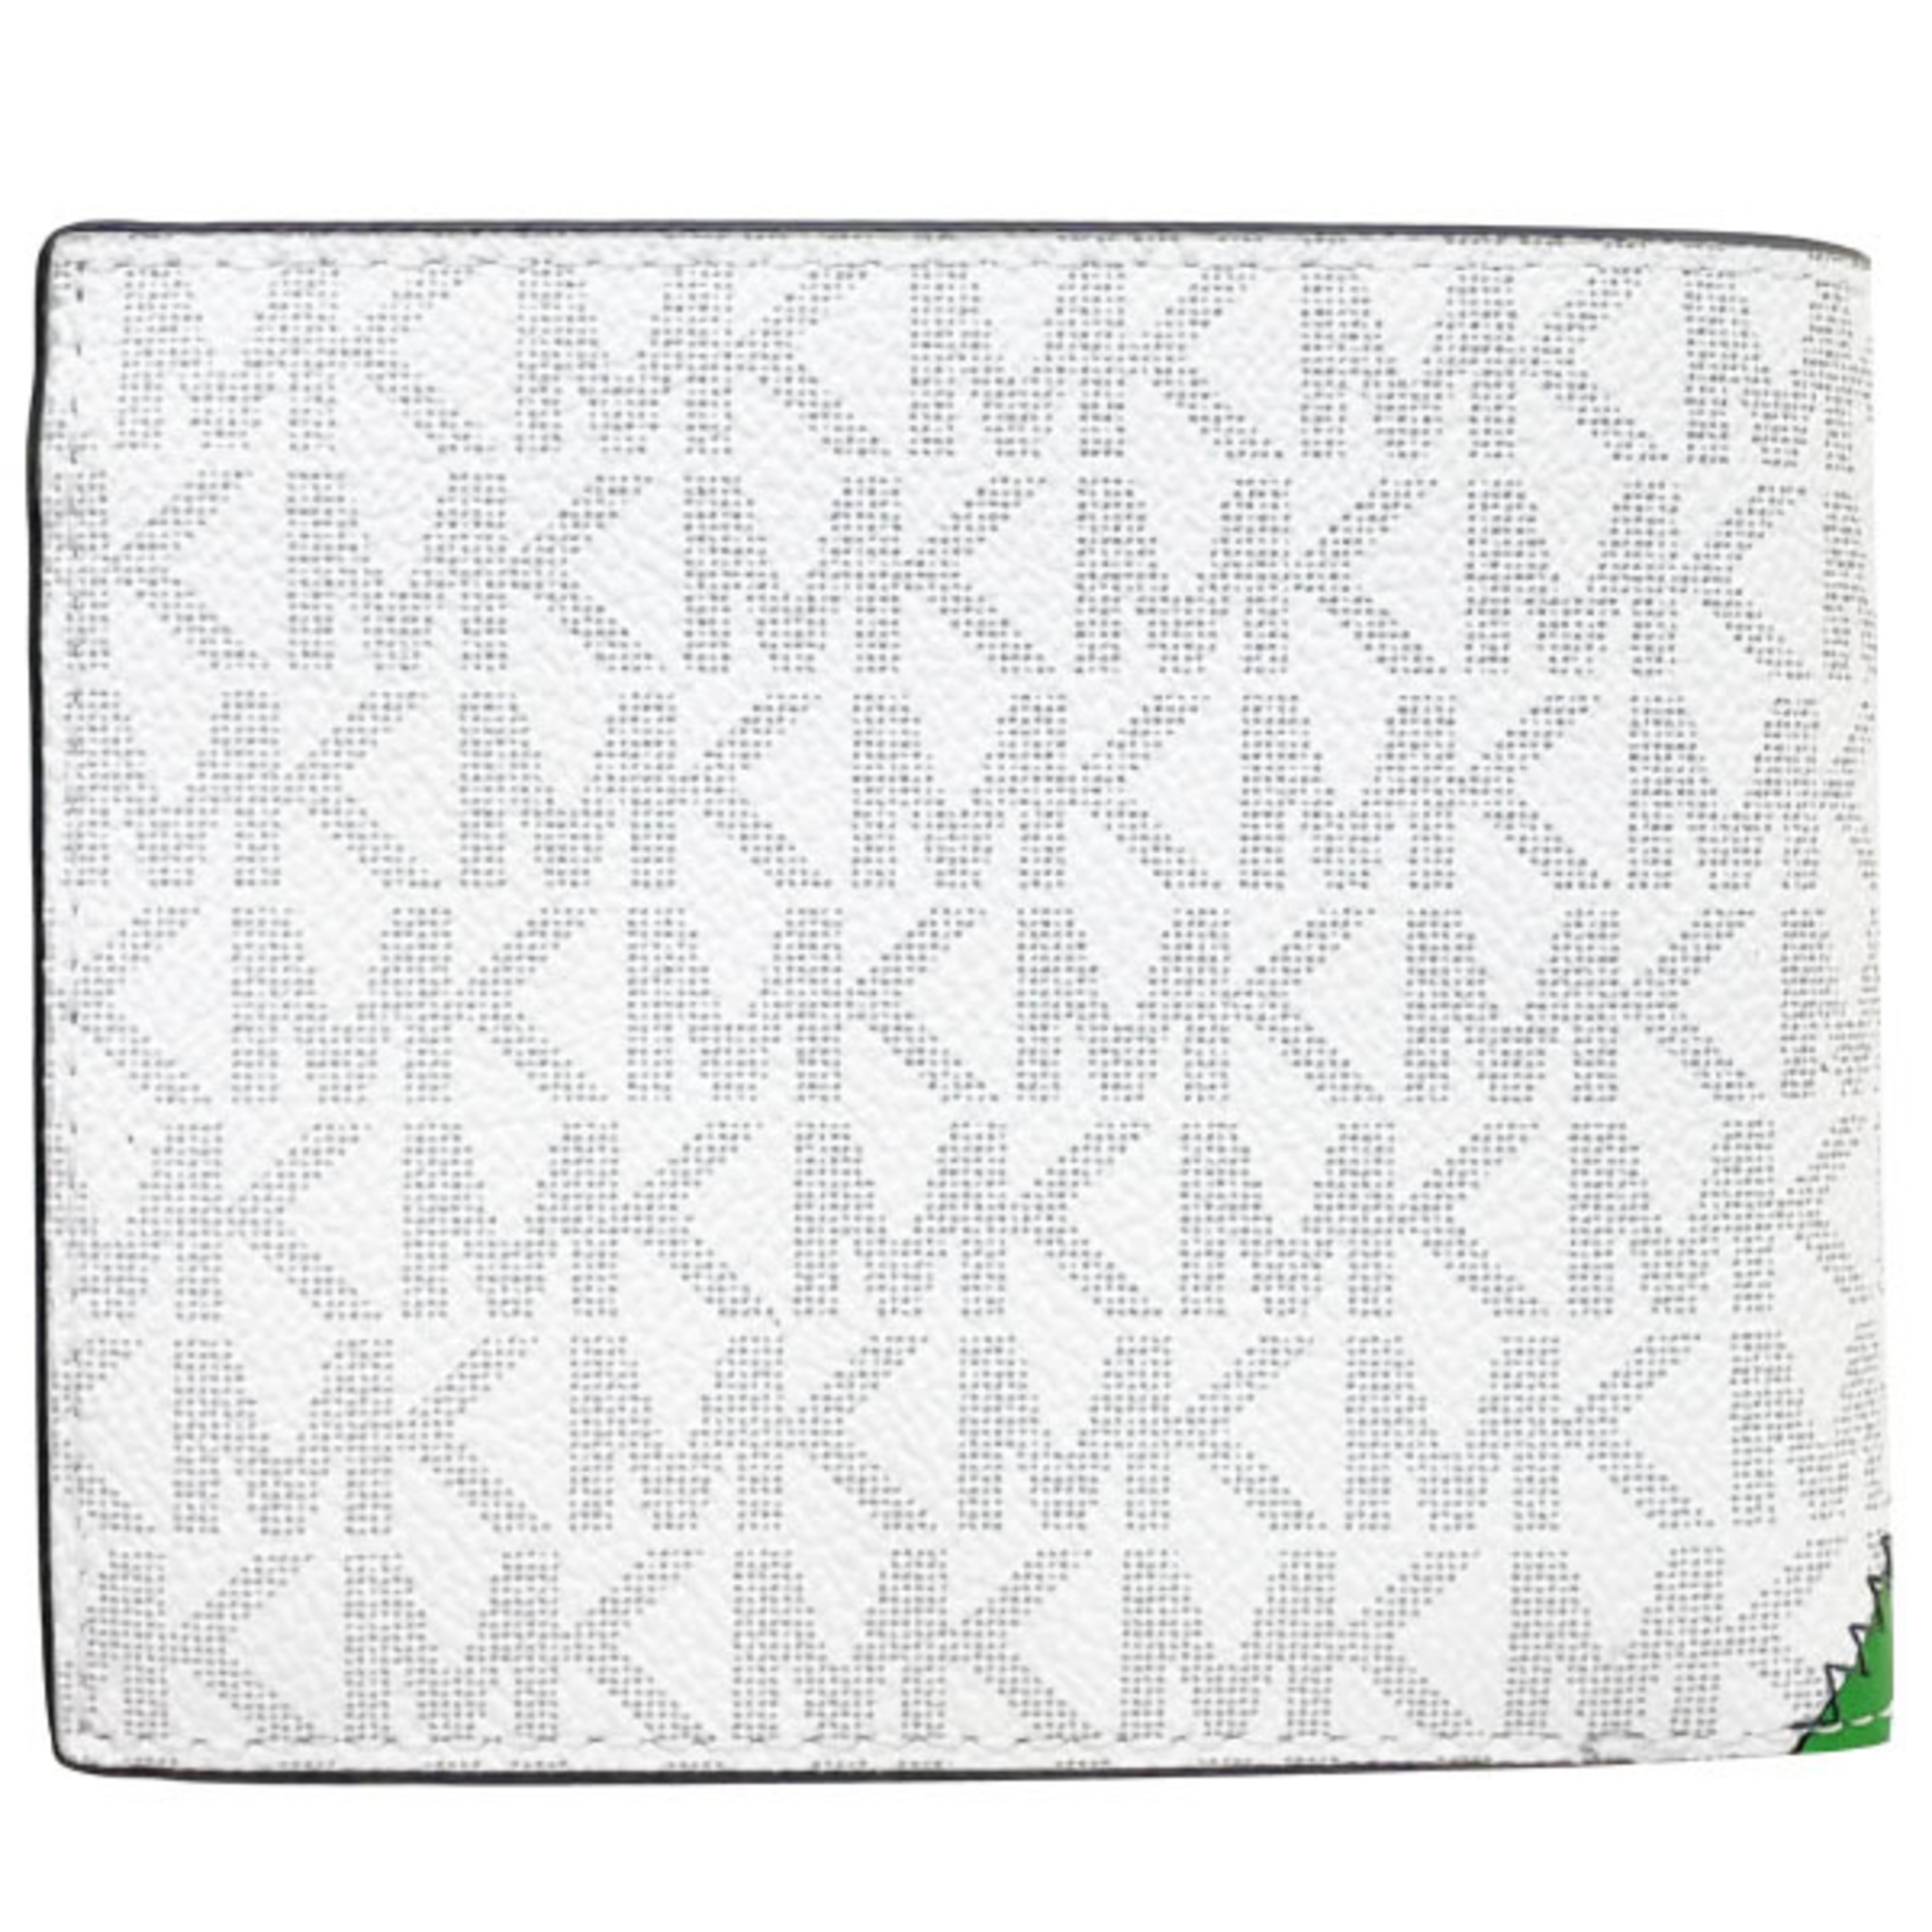 Michael Kors Wallet Cooper Signature Billfold Double Coin Pocket PVC Leather Palm Green 36R3LCOF3U MICHAEL KORS MK Bi-fold Compact Outlet COOPER NT-12449